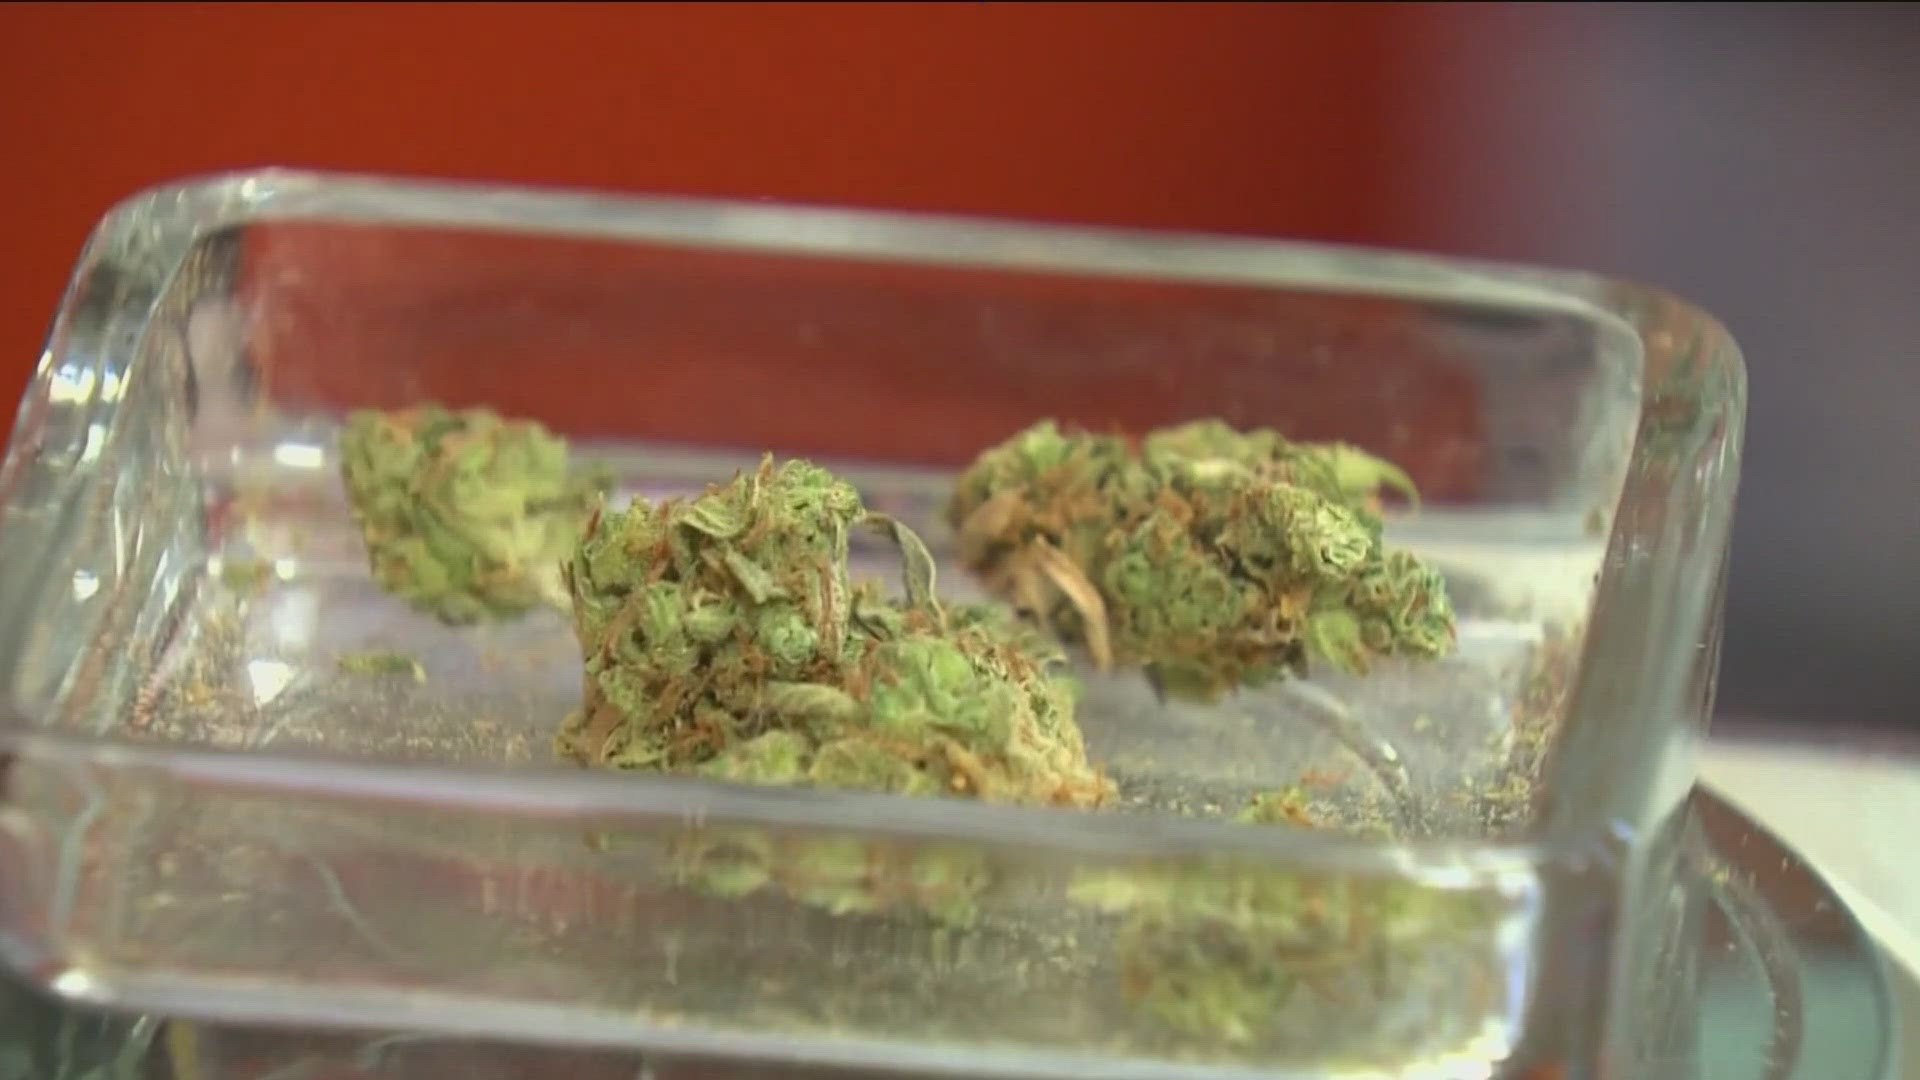 Local leaders said they have concerns about allowing recreational marijuana dispensaries in Hancock County.